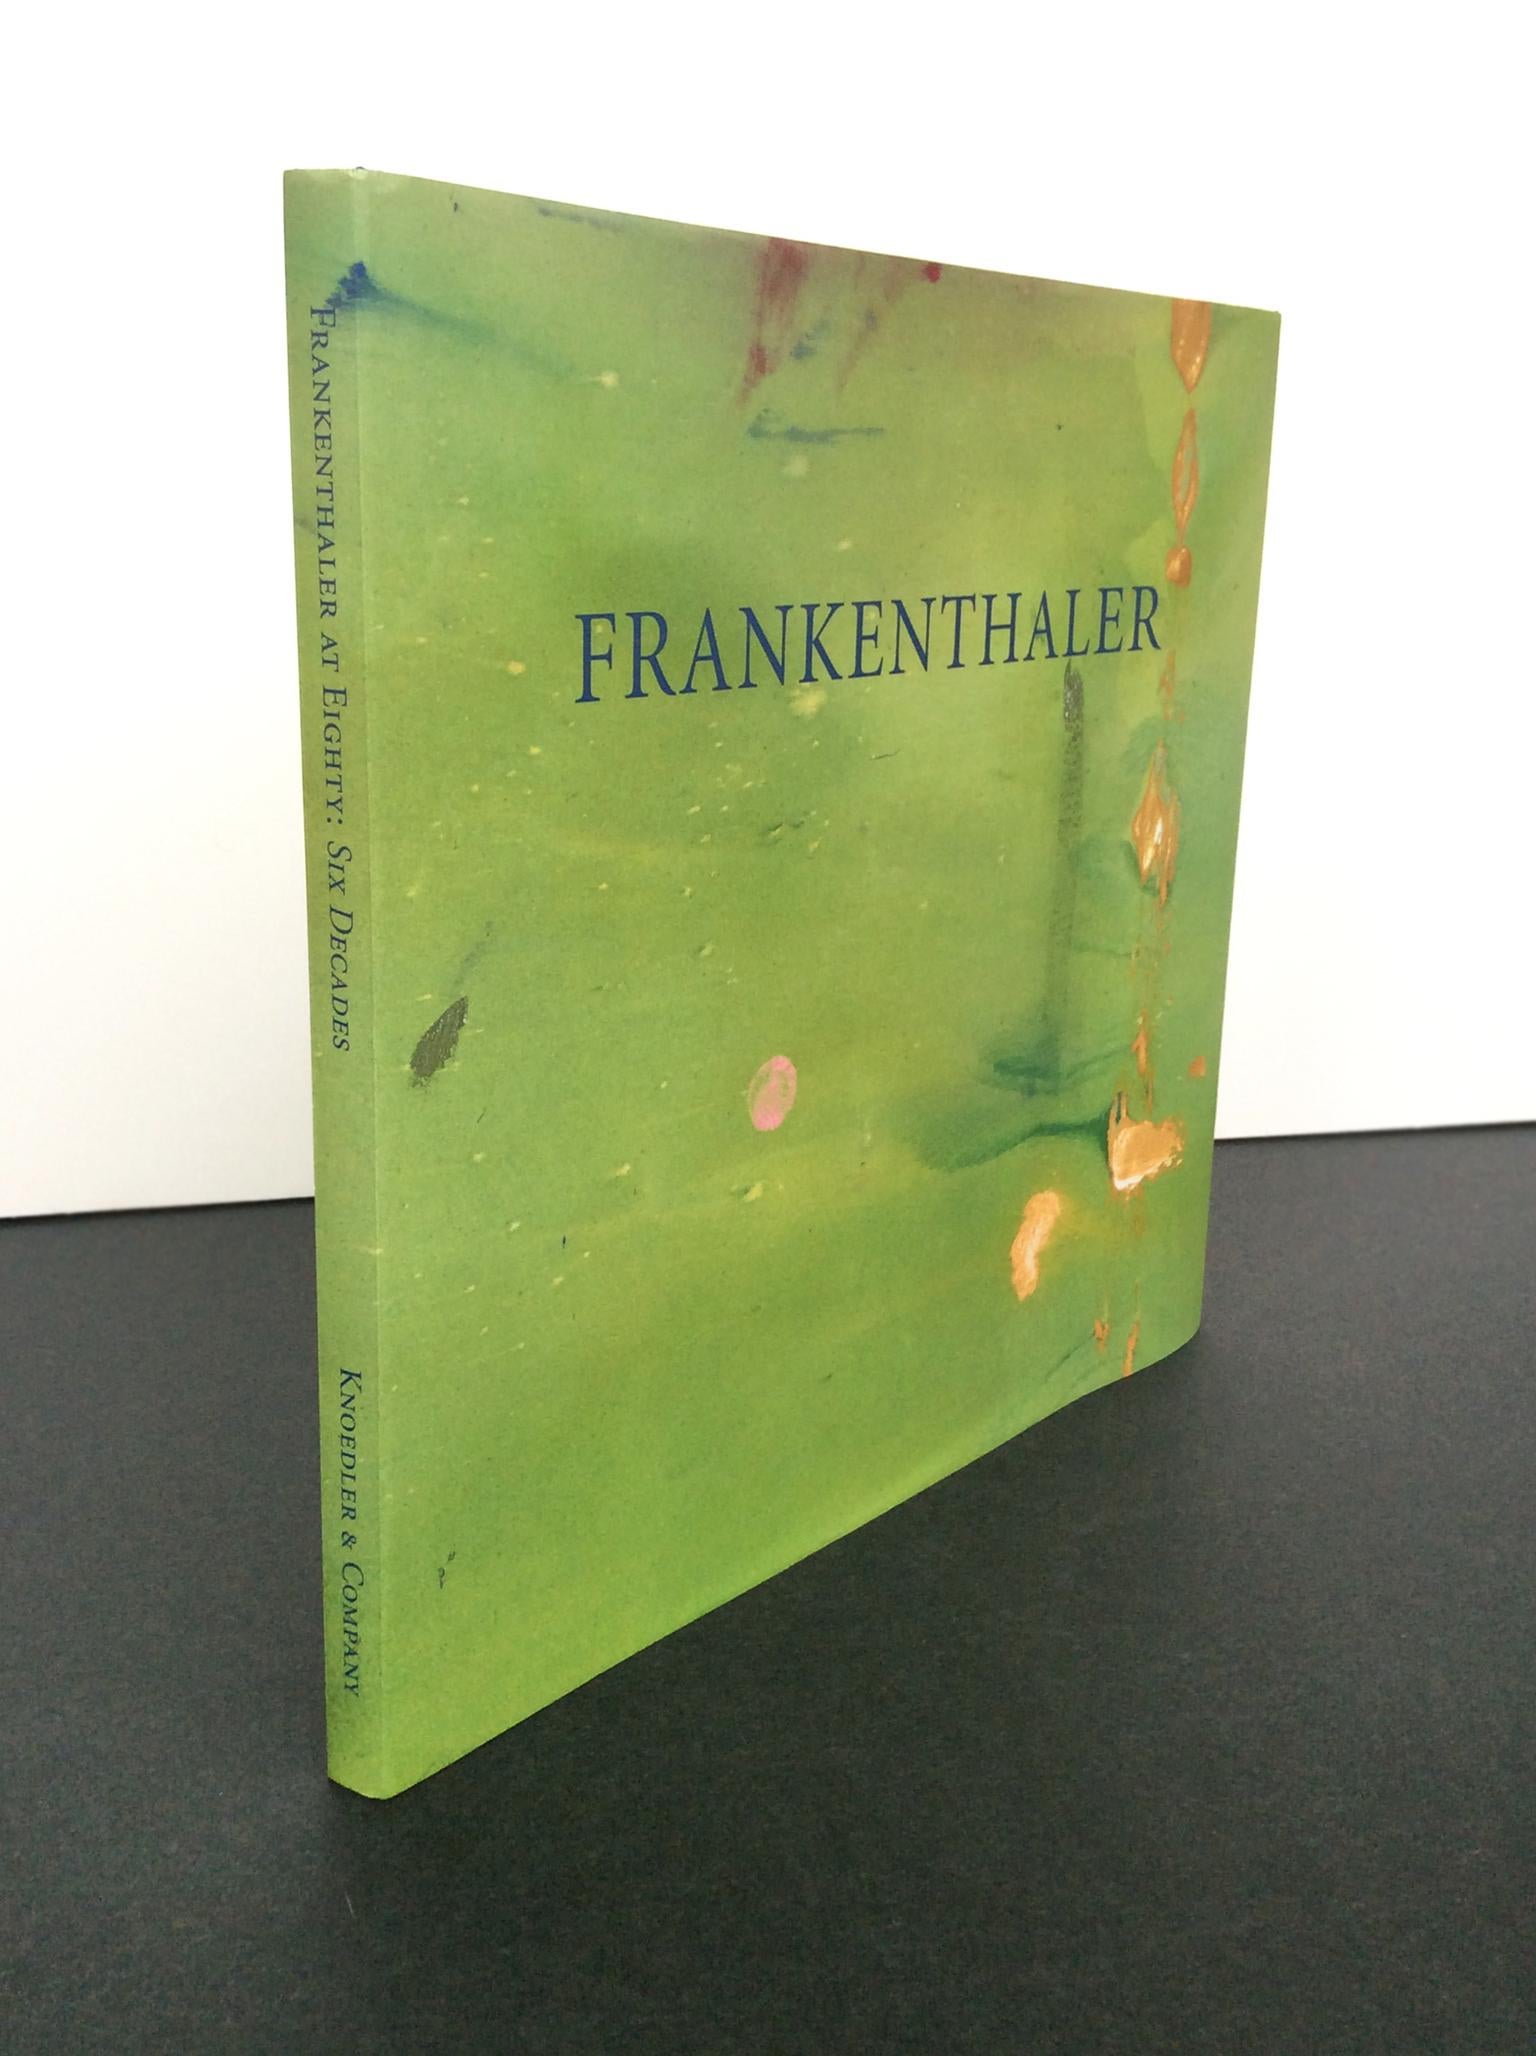 A beautifully illustrated exhibition catalogue surveying the works of American painter Helen Frankenthaler (1928-2011). The book was published in occasion of the 2008-2009 show at Knoedler & Company in New York City. Hardcover with dust-jacket and